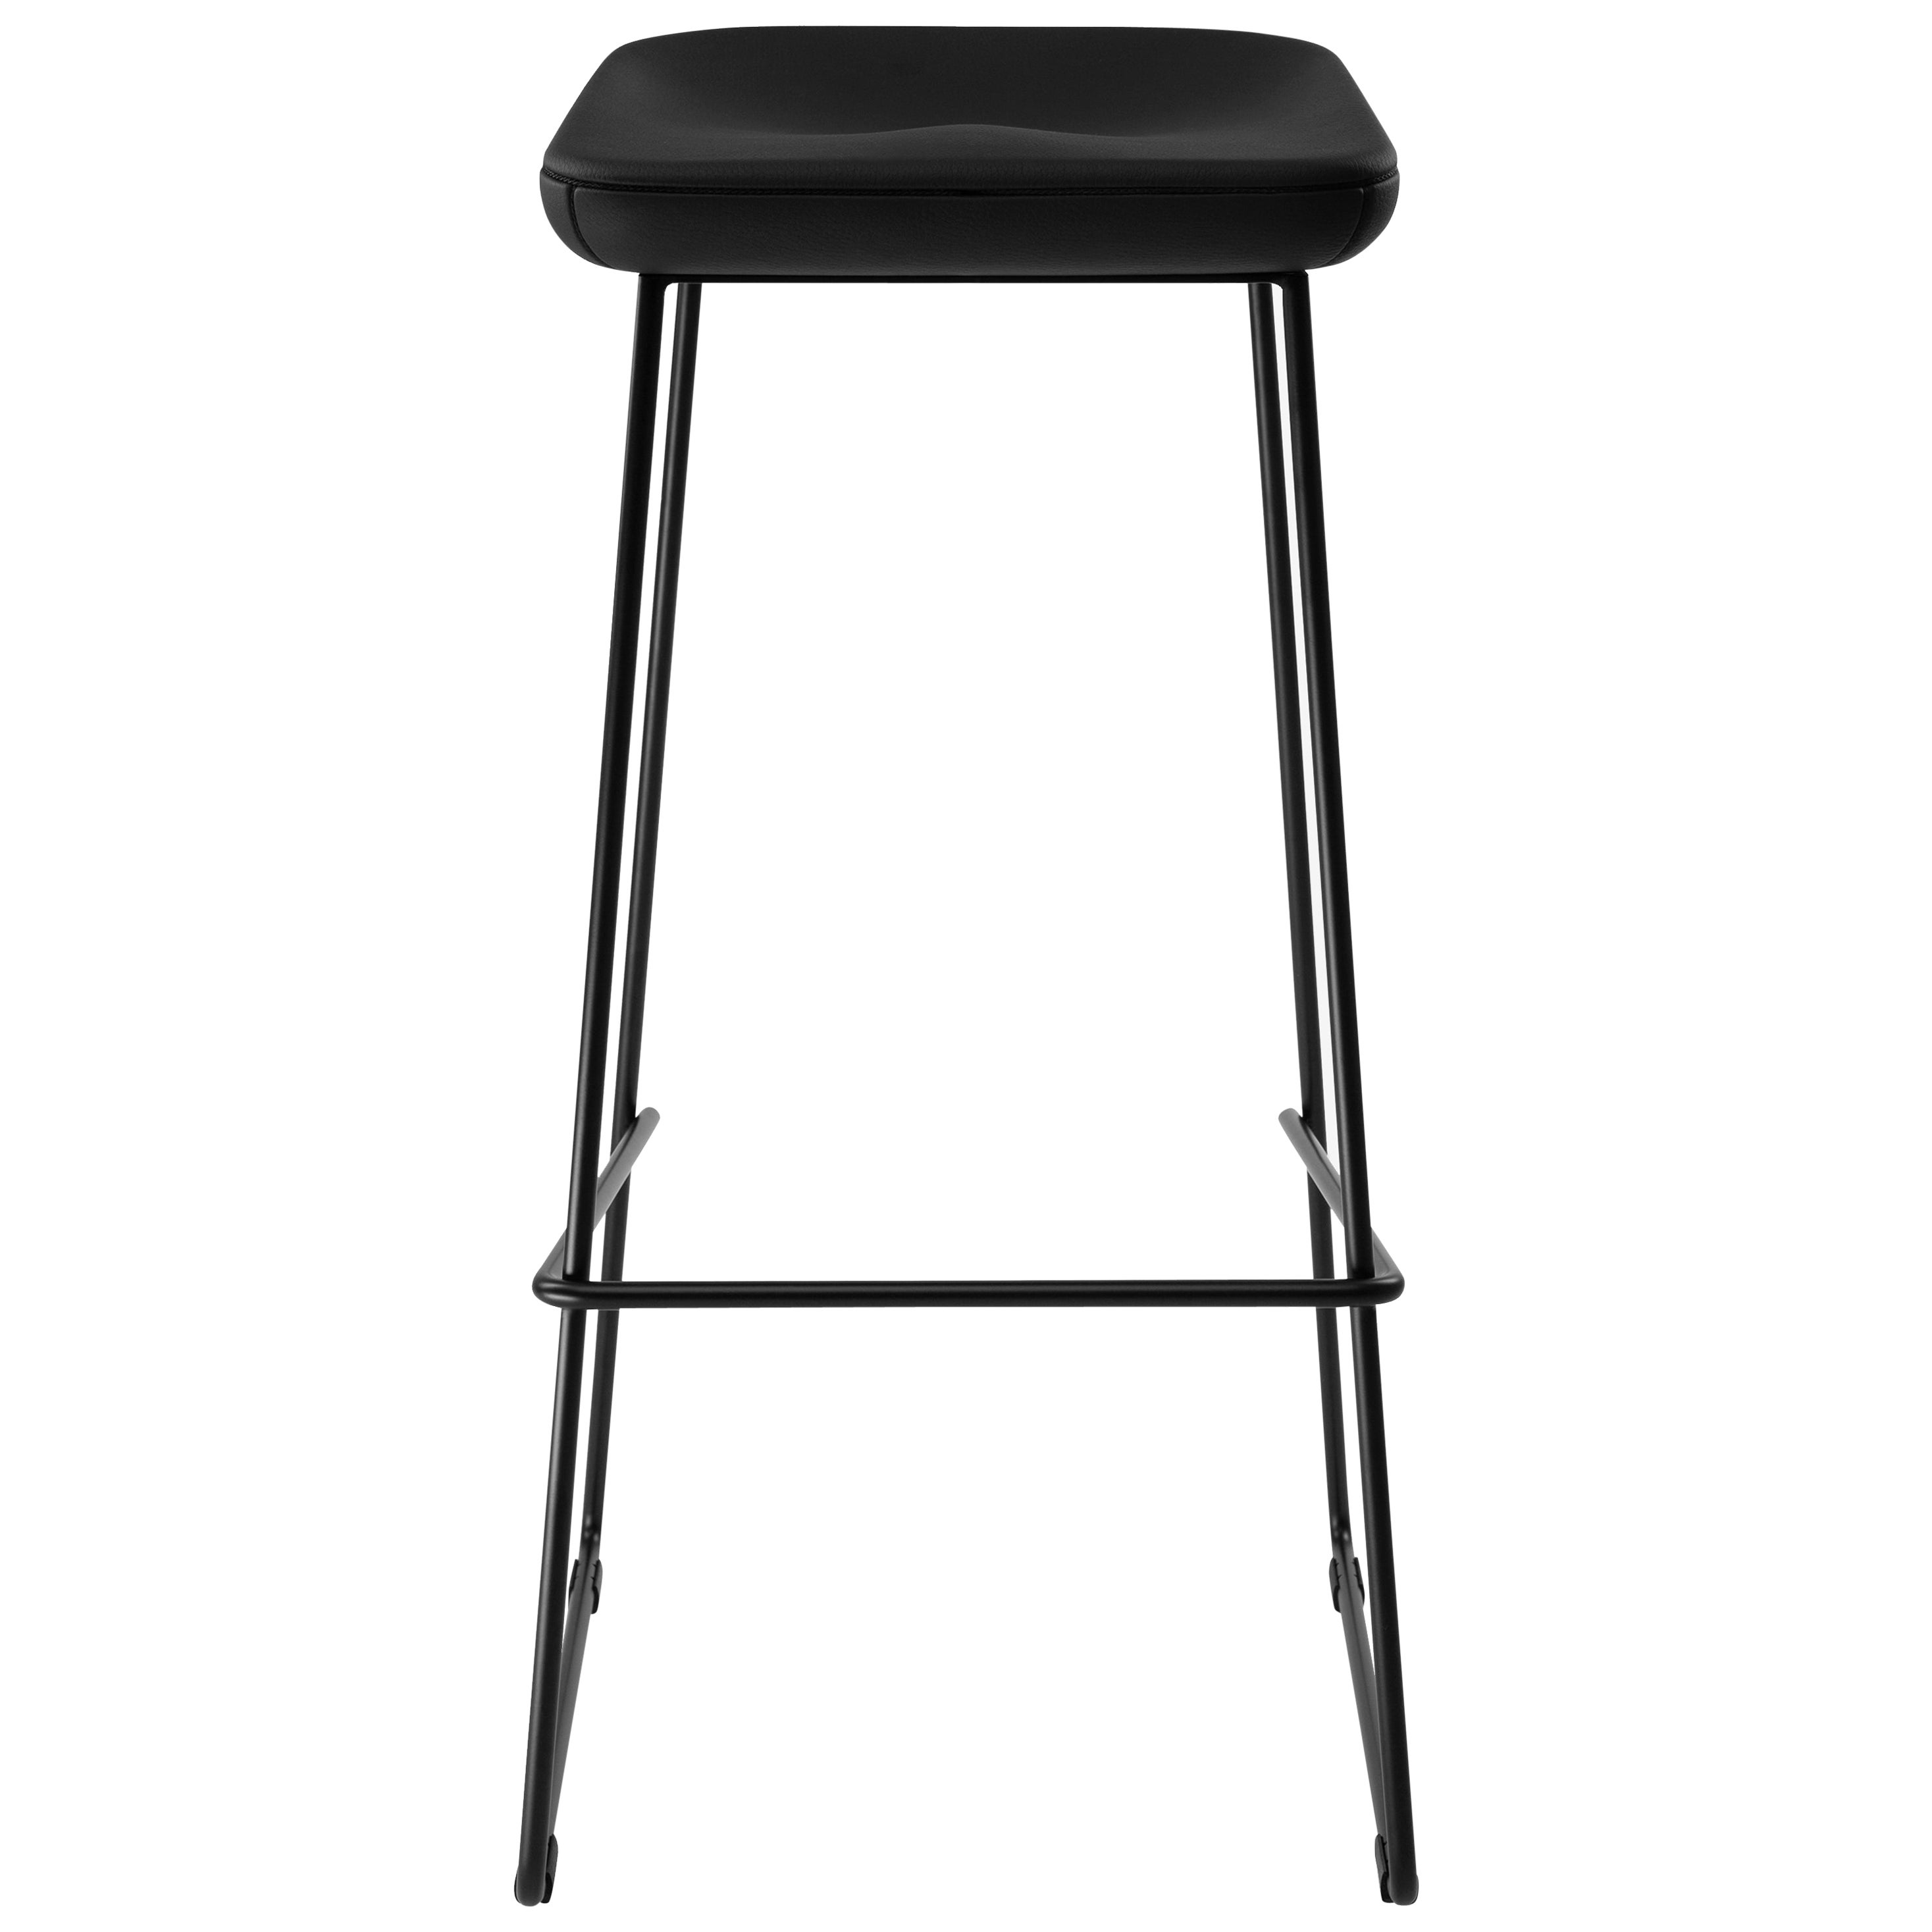 Stylish and Comfortable Bar Stool Wave with Leather seat and Steel Frame. Discover the perfect seating solution for your bar or kitchen counter with the Bar Stool Wave. Made with a comfortable leather seat and durable steel frame, this stylish bar